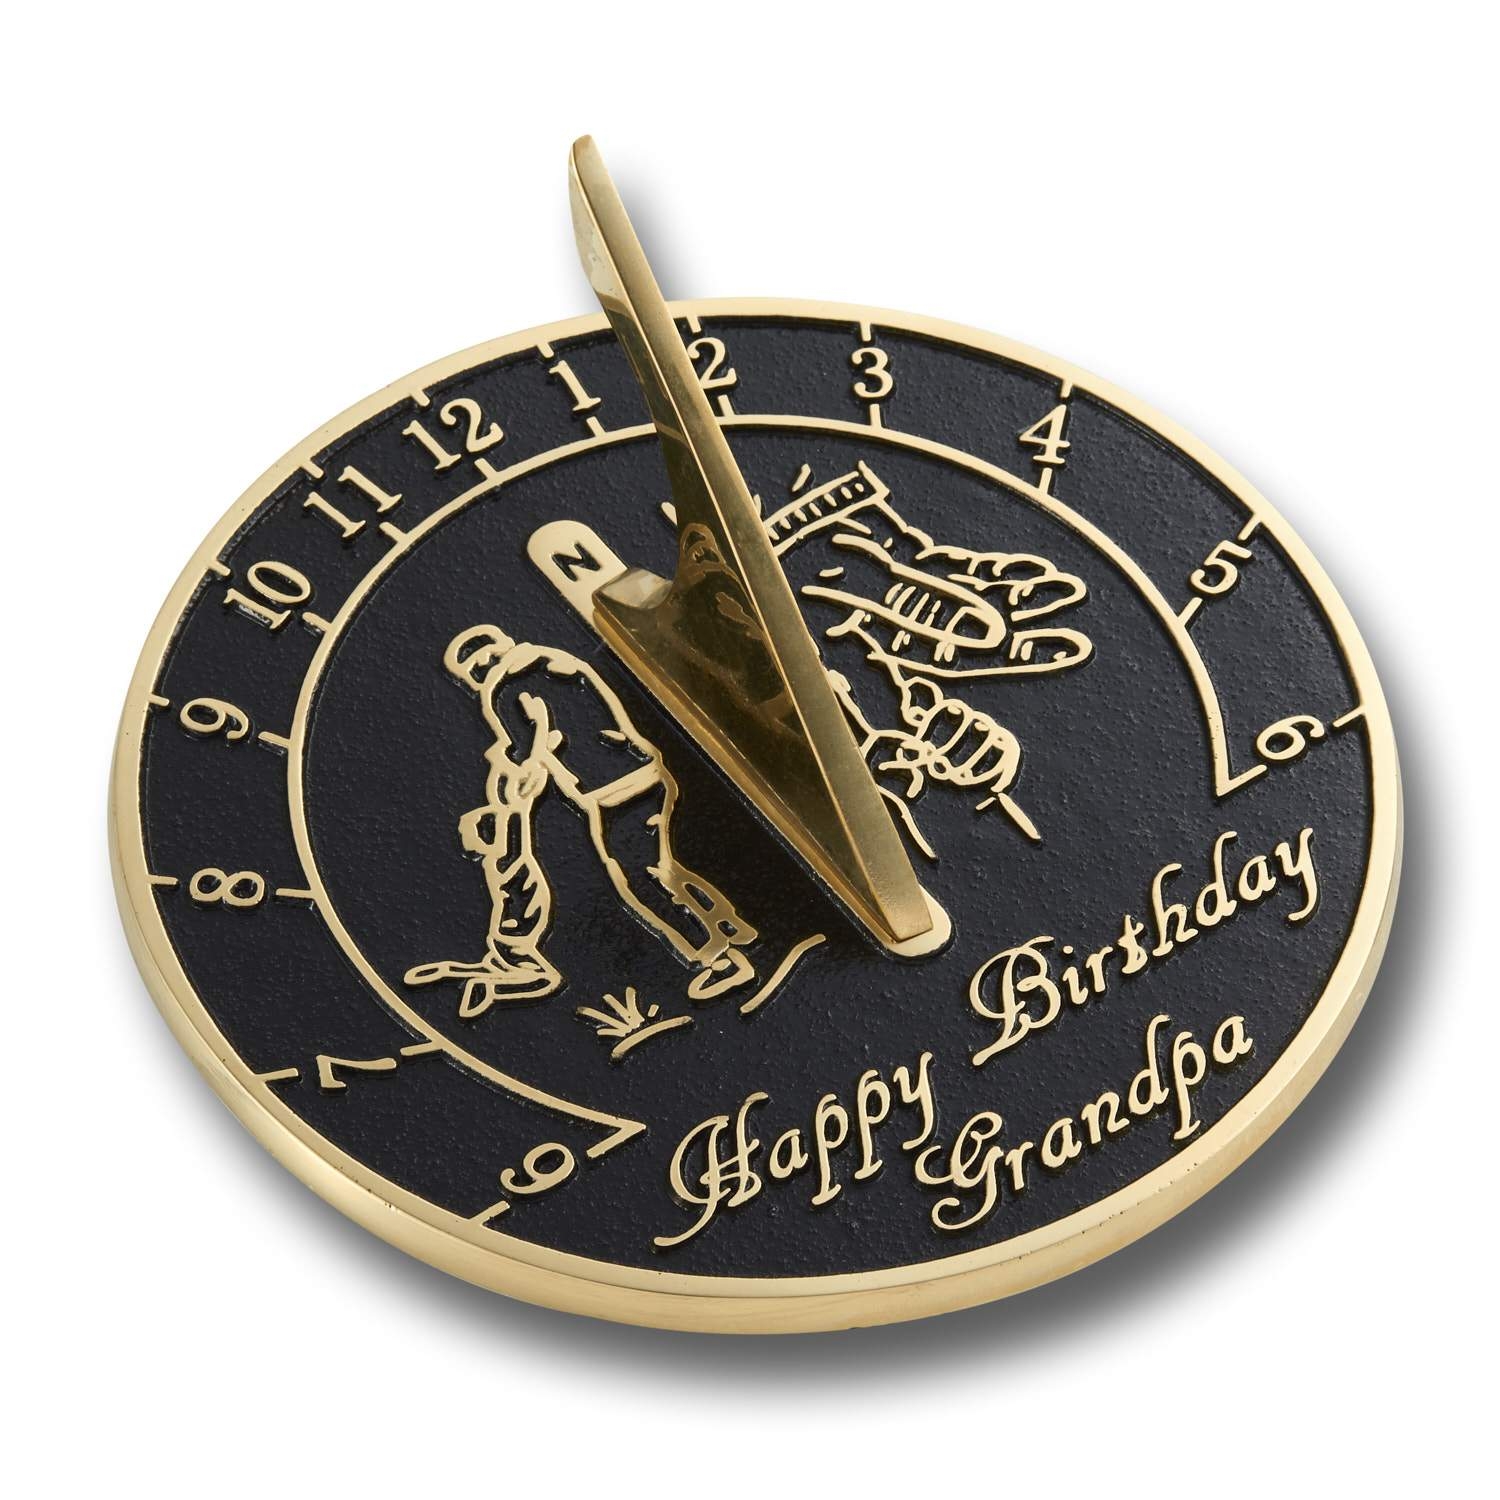 Happy Birthday Grandpa Sundial Gift. New Idea For His Garden Or As An Ornament From Grandson, Granddaughter Or Grandkids. Lasting Card For Him On His Birthday